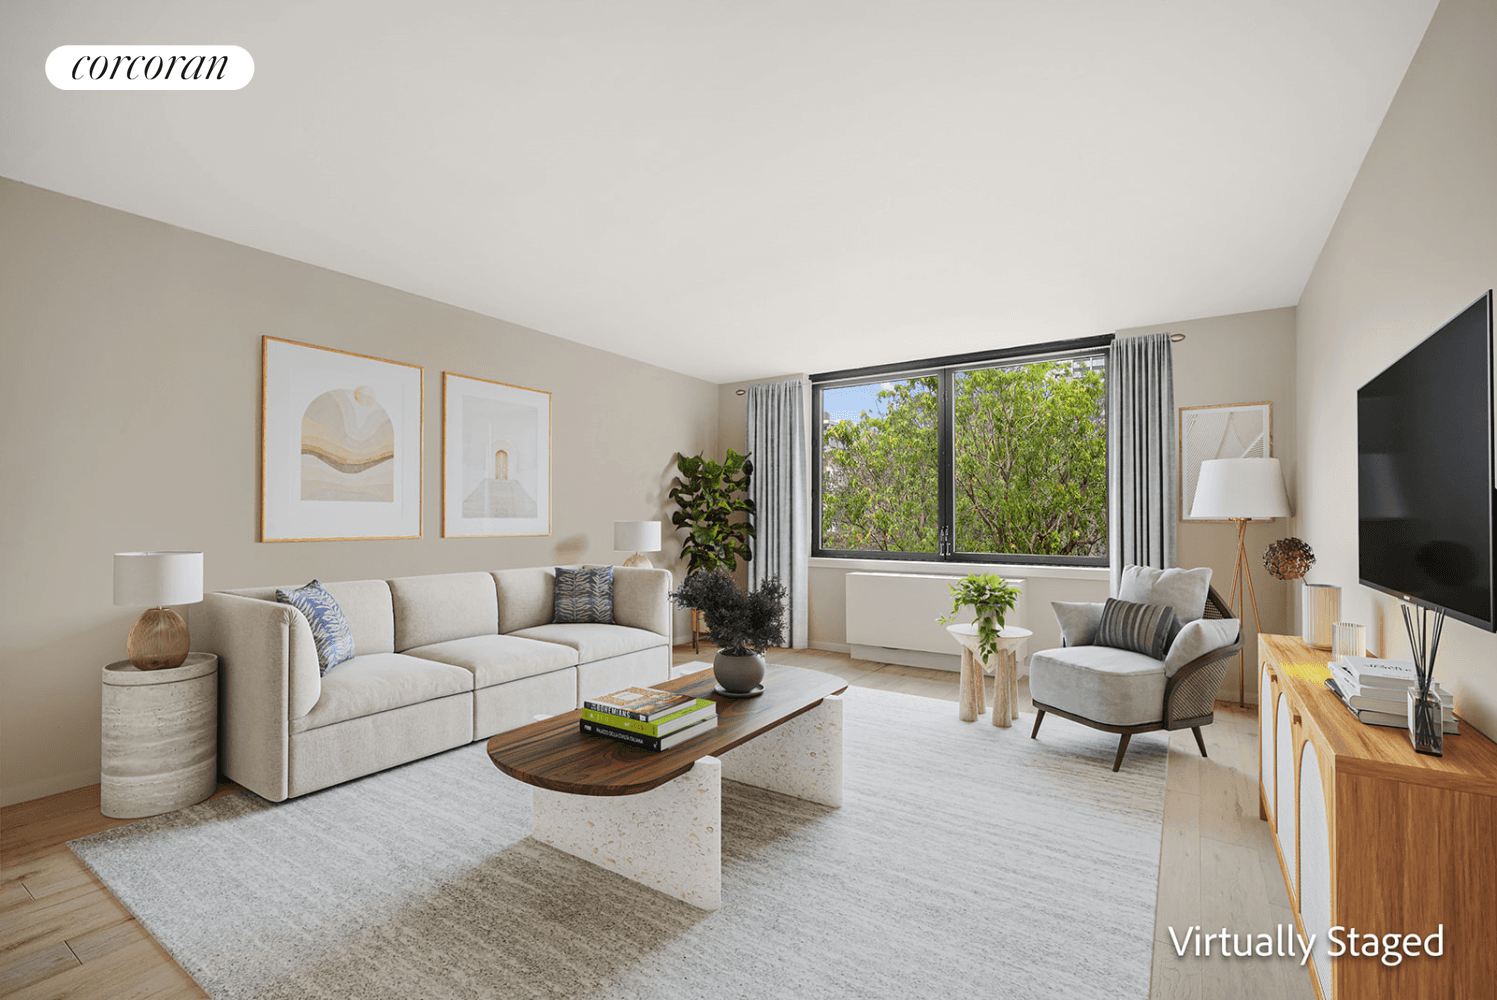 Experience the luxury of being the first to reside in this newly renovated apartment, featuring a serene, leafy view in a recently transformed condominium just one block from Central Park.